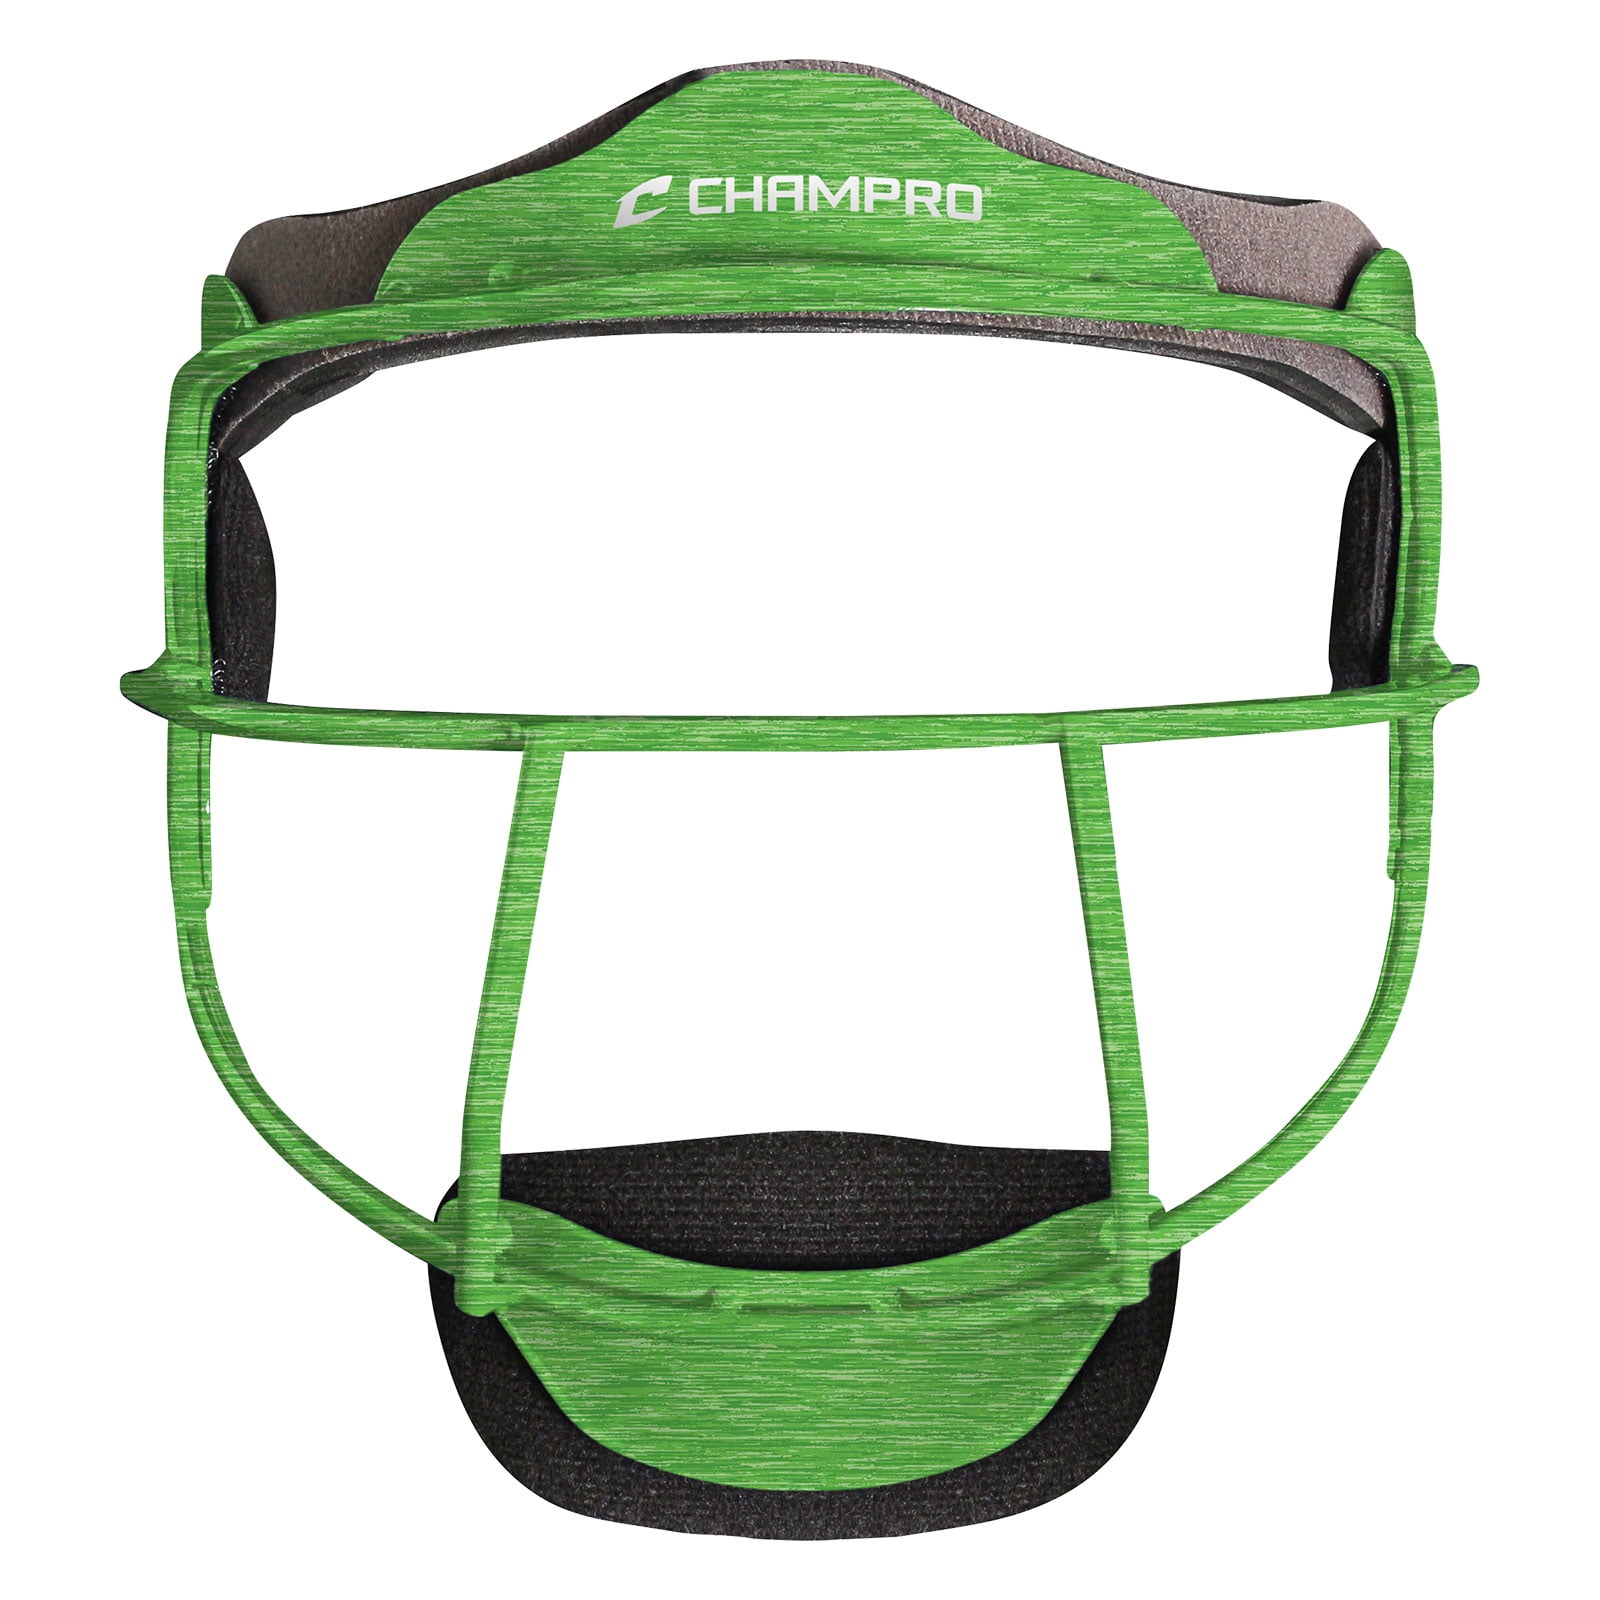 Champro The Grill Defensive Fielders Softball Face Mask NEW Various Colors/Sizes 